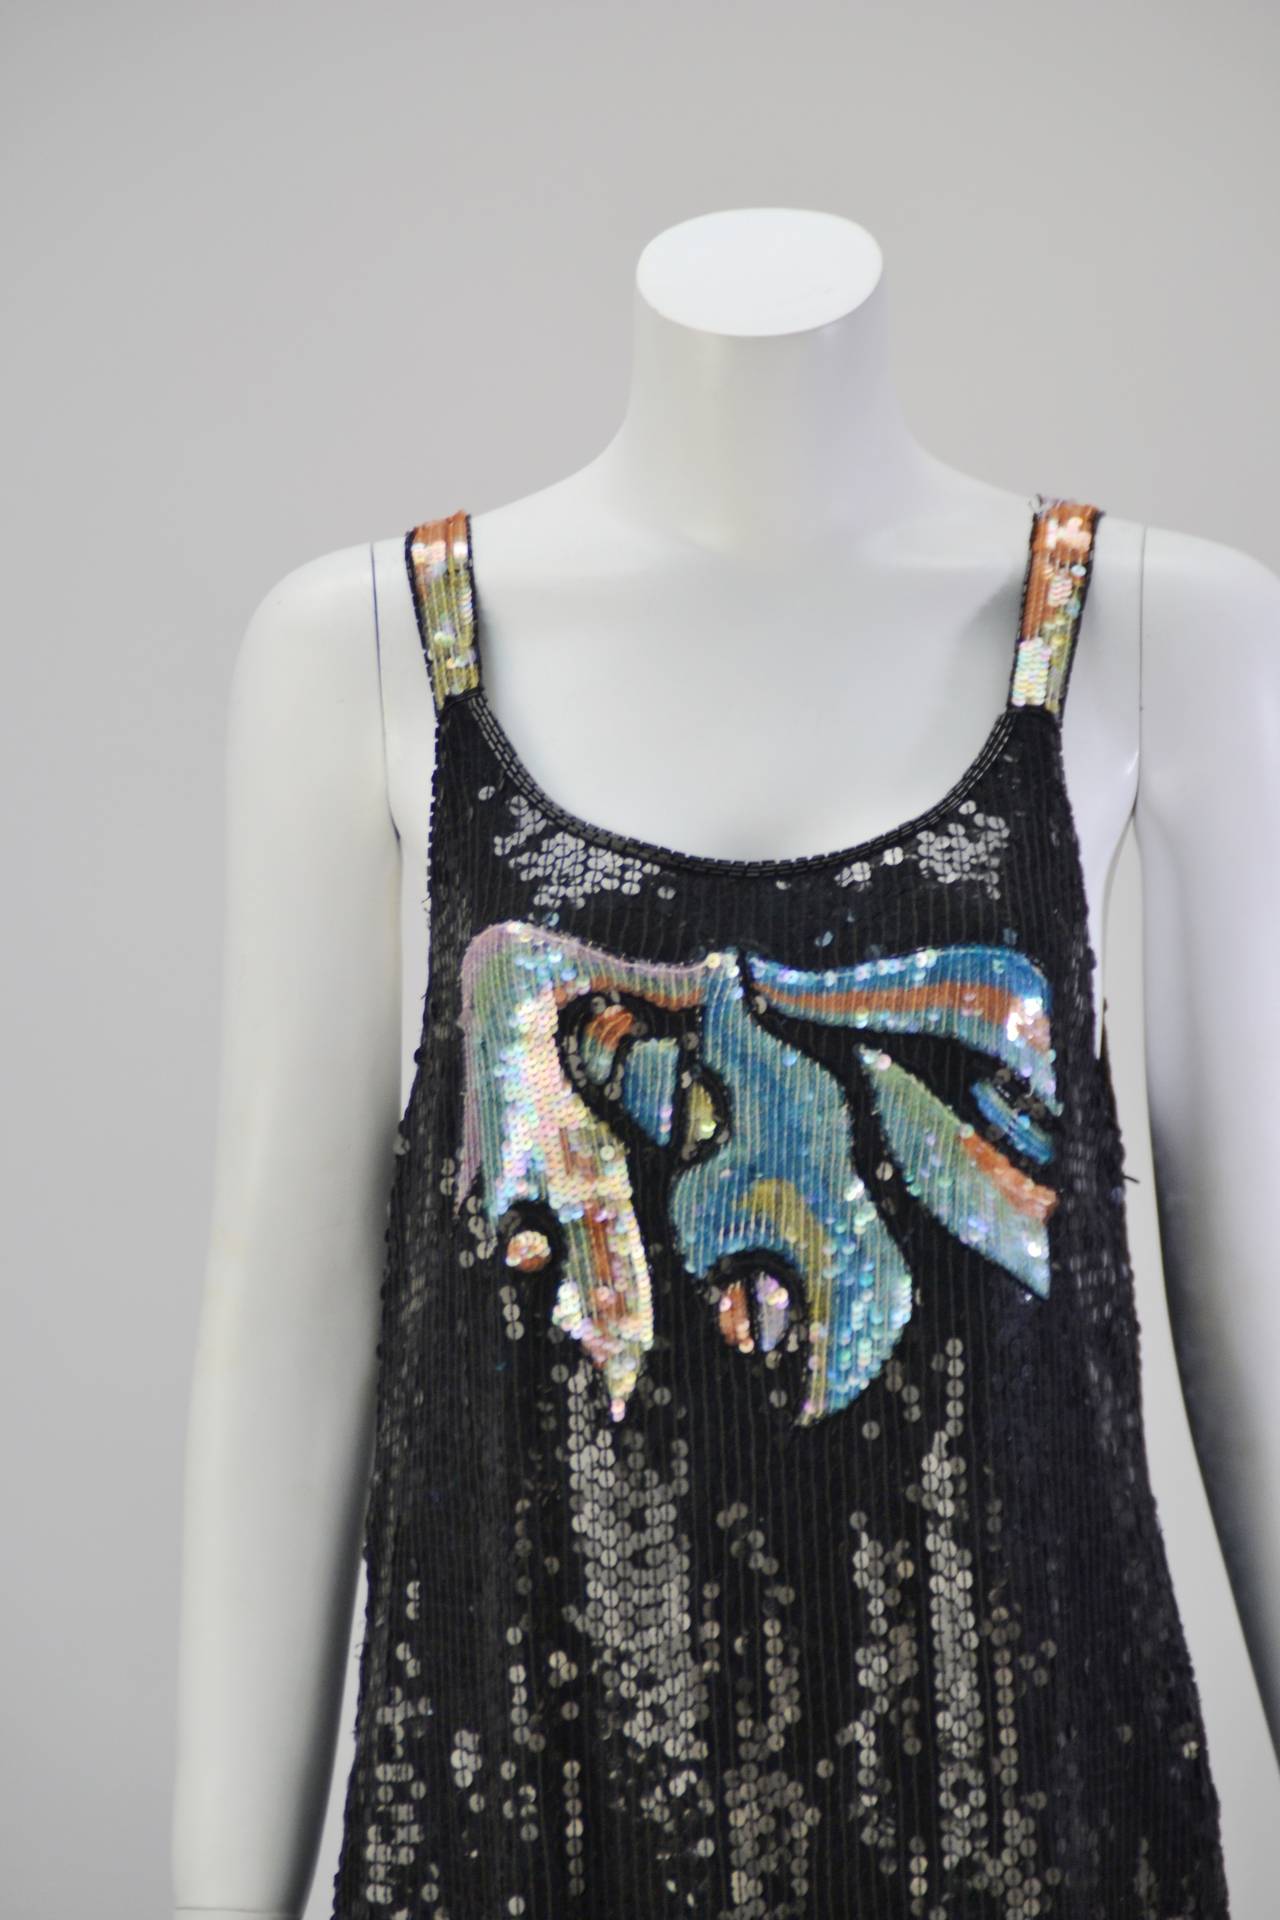 Women's 1980s Stunning Sleeveless Black and Multi-Colored Sequin and Beaded Dress